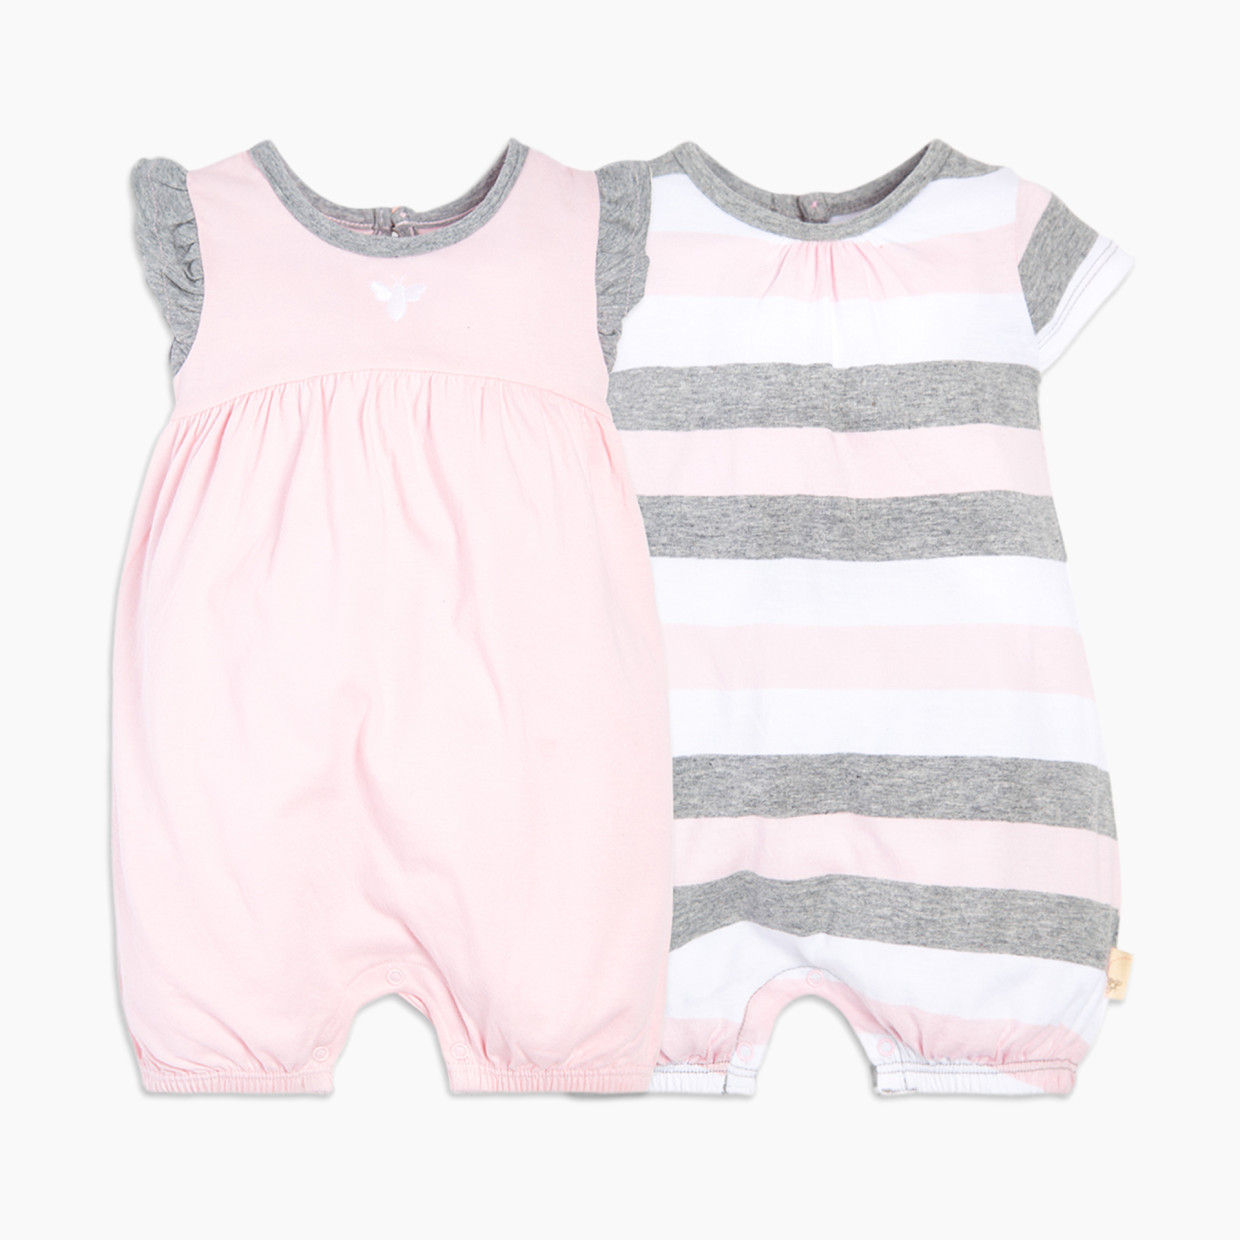 Burt's Bees Baby 2 Pack Rompers - Blossom Multi Stripe, 3-6 Months.